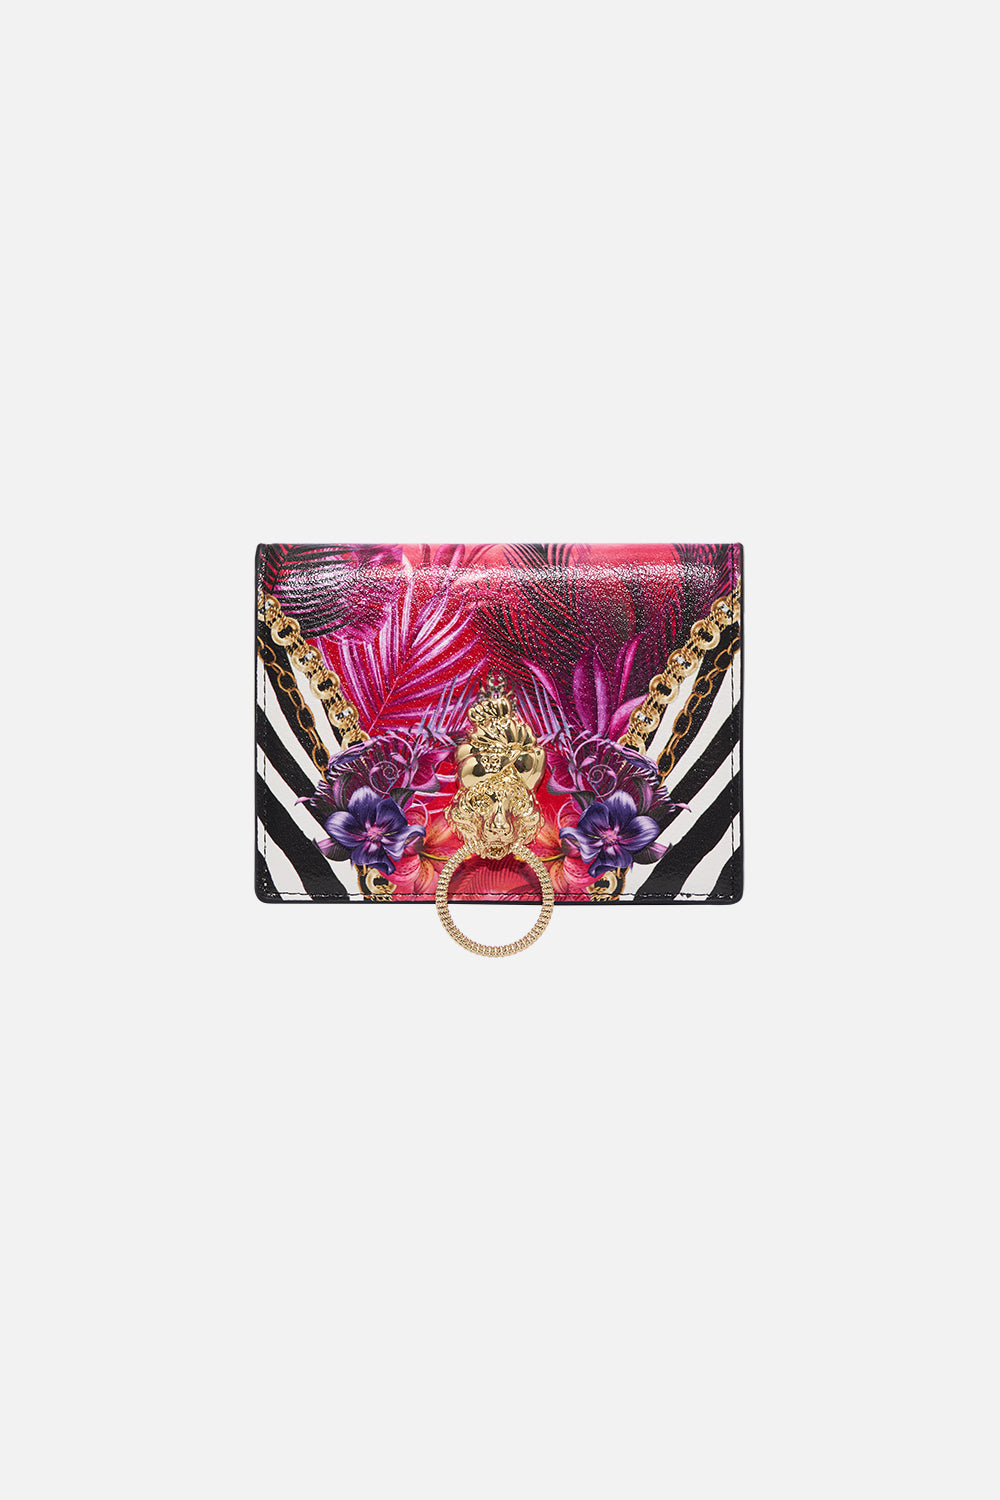 Product view of CAMILLA wallet in Wild Loving print